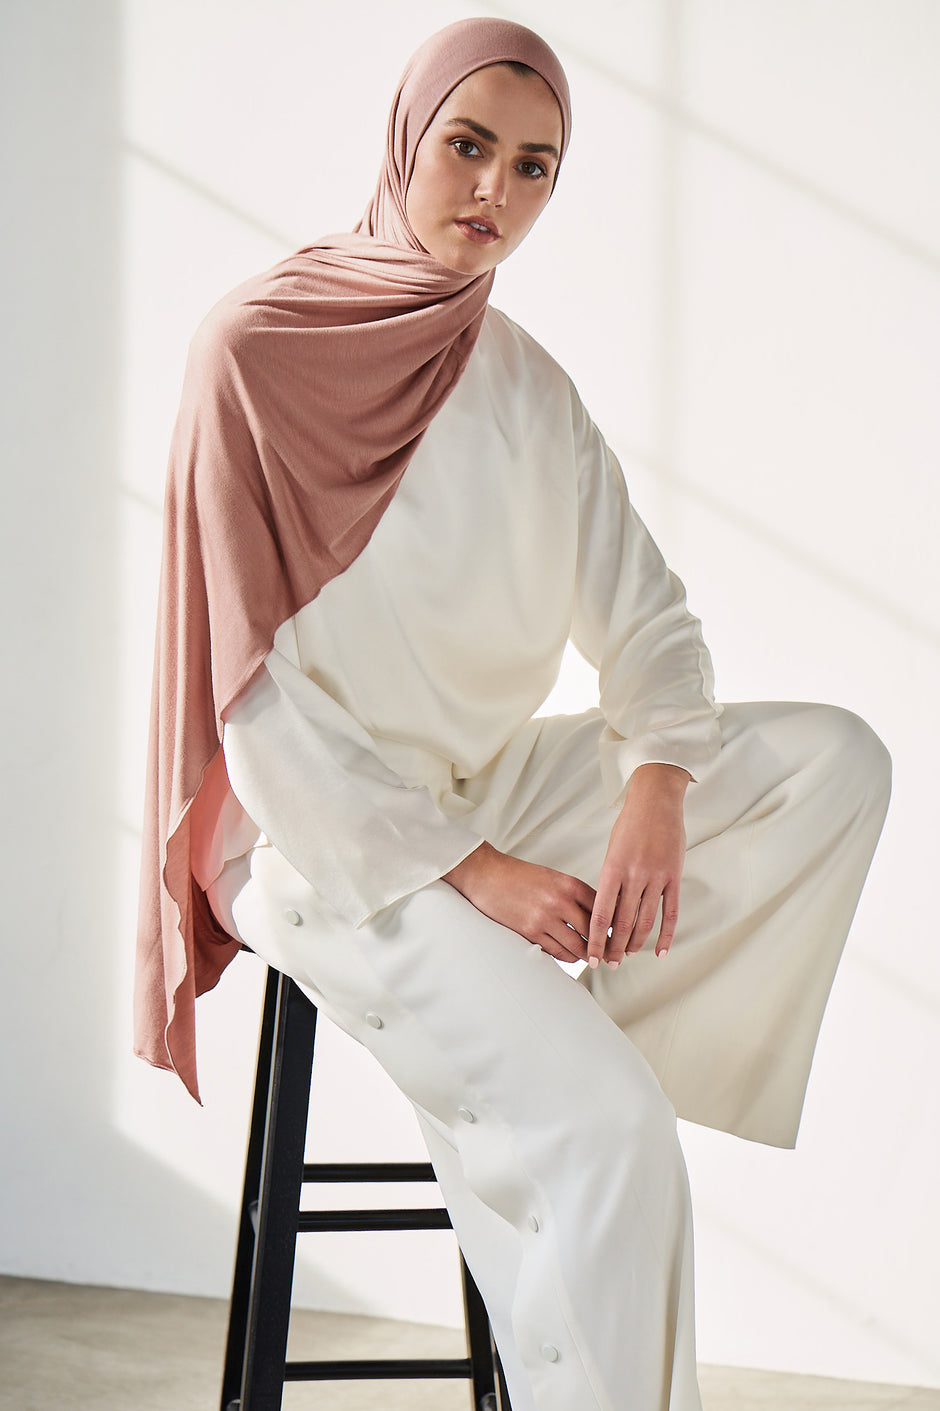 Haute Hijab - Shop All Hijabs in Jersey, Chiffon, Woven, and More!